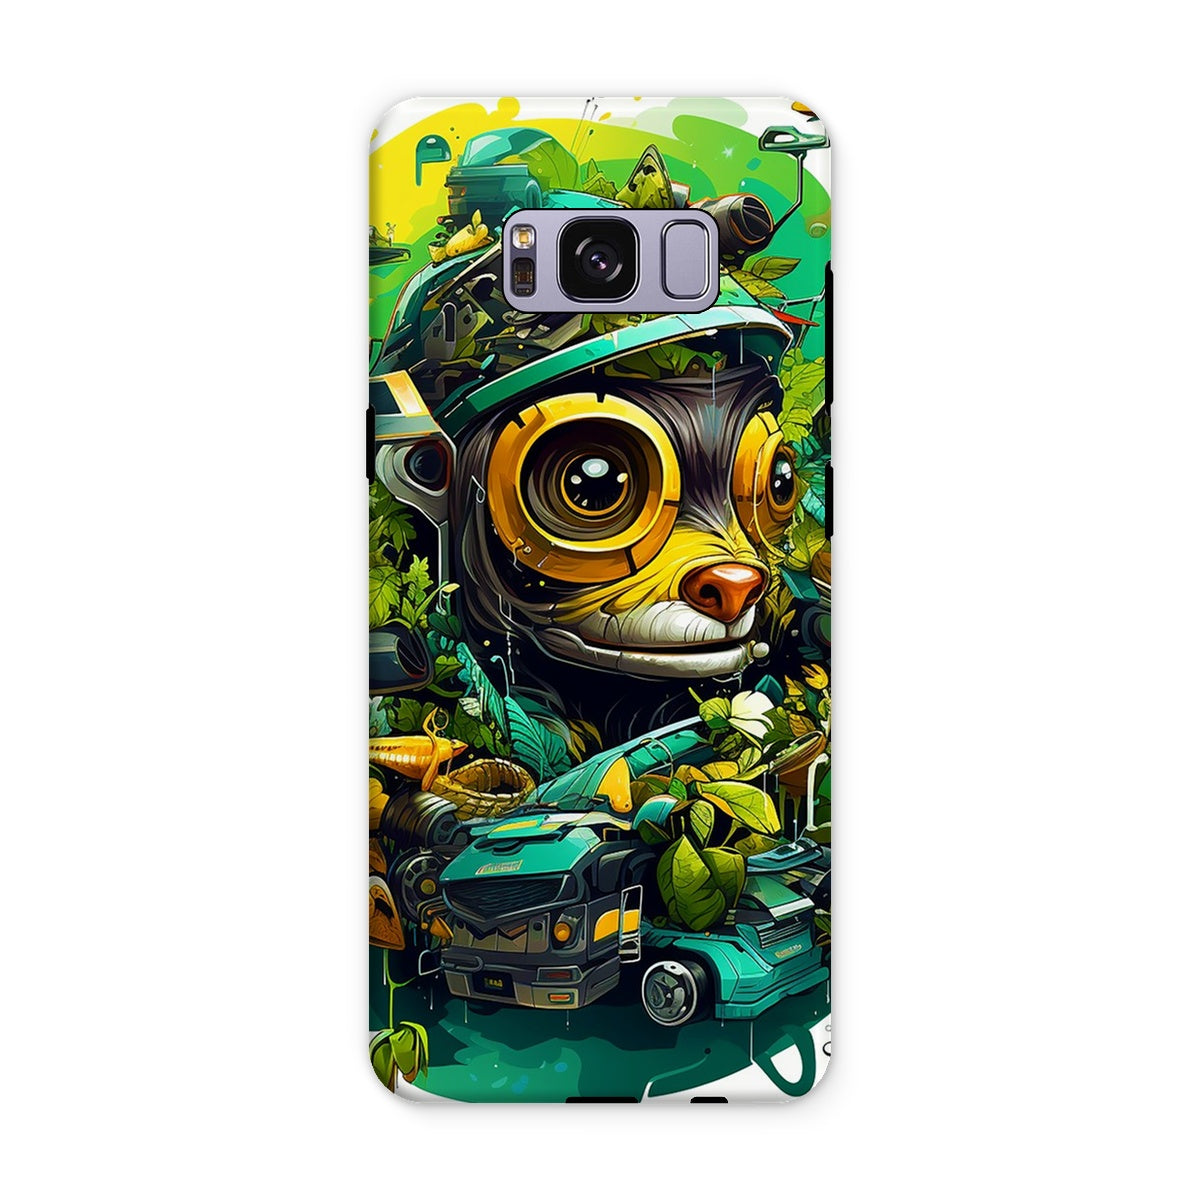 Nature's Resilience: Surreal Auto-Forest Artwork - Whimsical Raccoon and Greenery Infused Car  Tough Phone Case